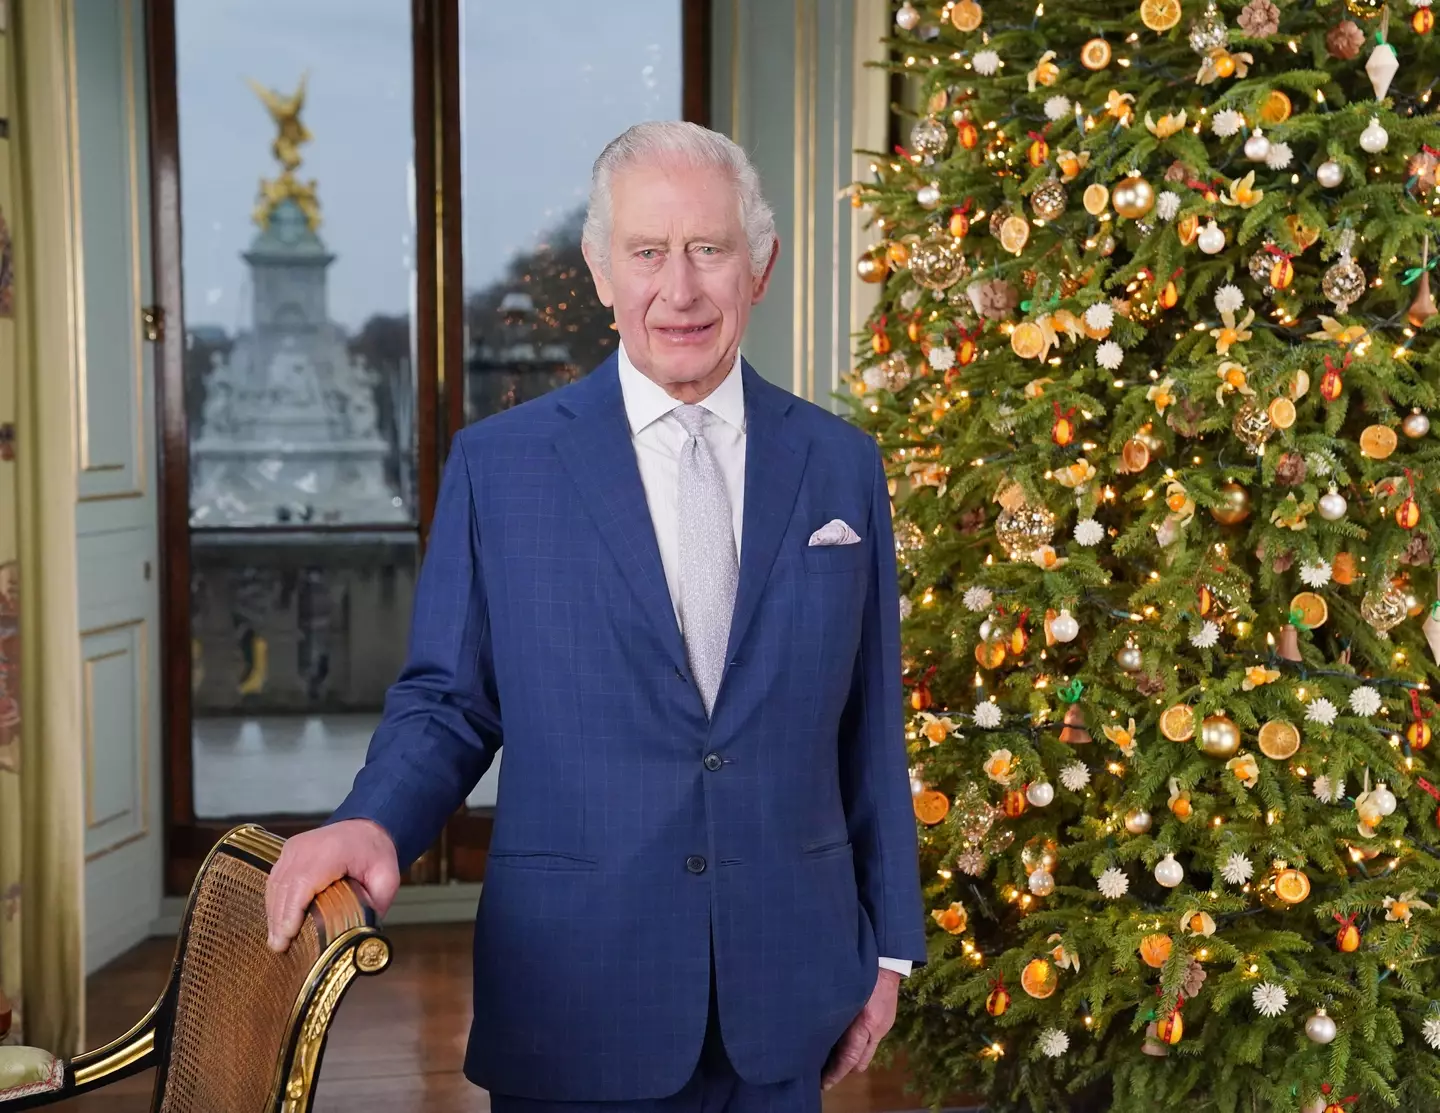 A picture of King Charles III taken on 7 December for his Christmas speech.